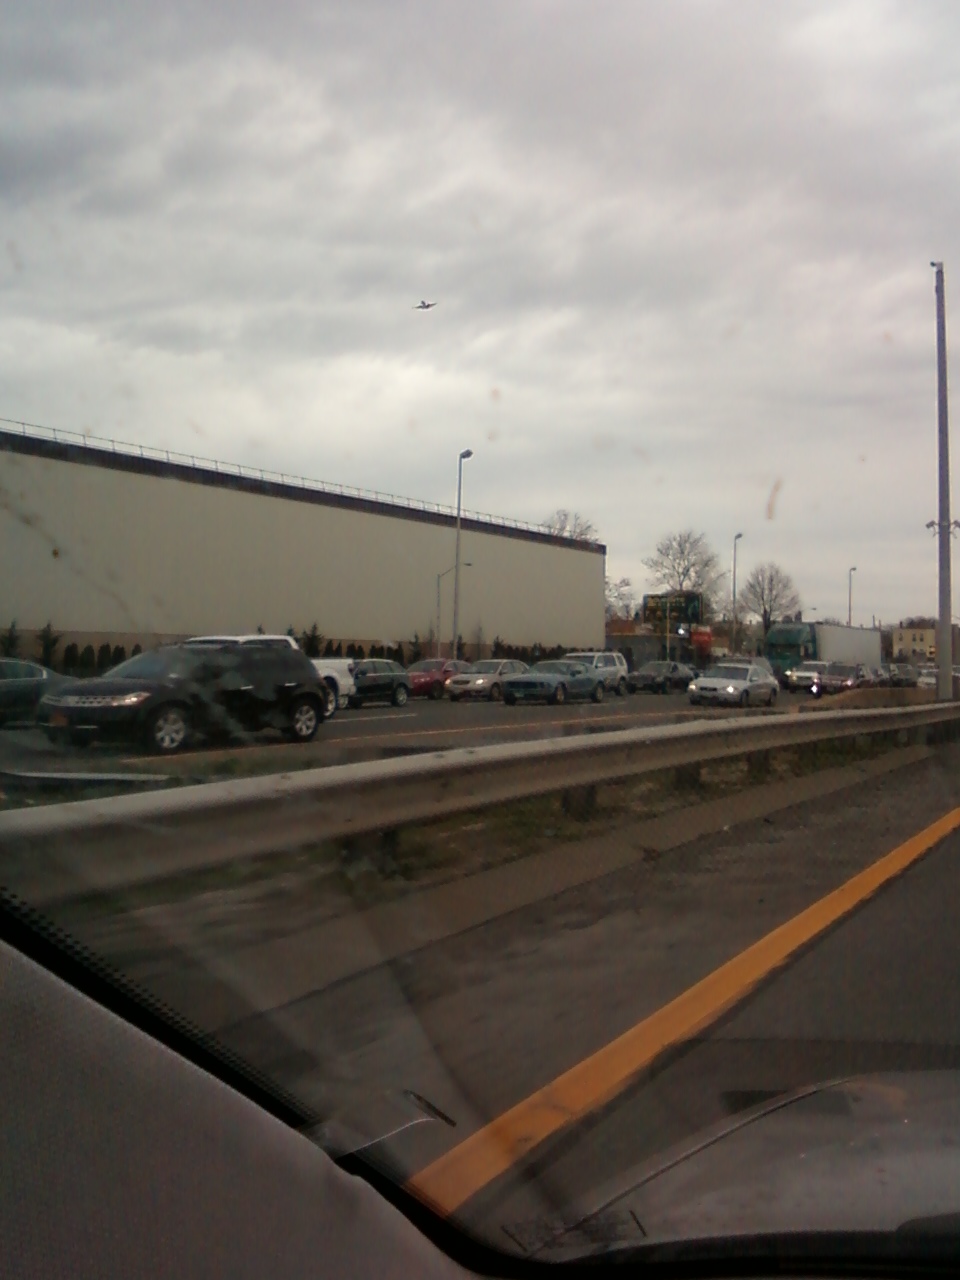 03/26/2012- I-678 south, Bronx County, NY, north of the Whitestone Bridge toll plaza, traffic is backed up for over two miles. Further details are available at
http://www.wirelessnotes.org/tolls/